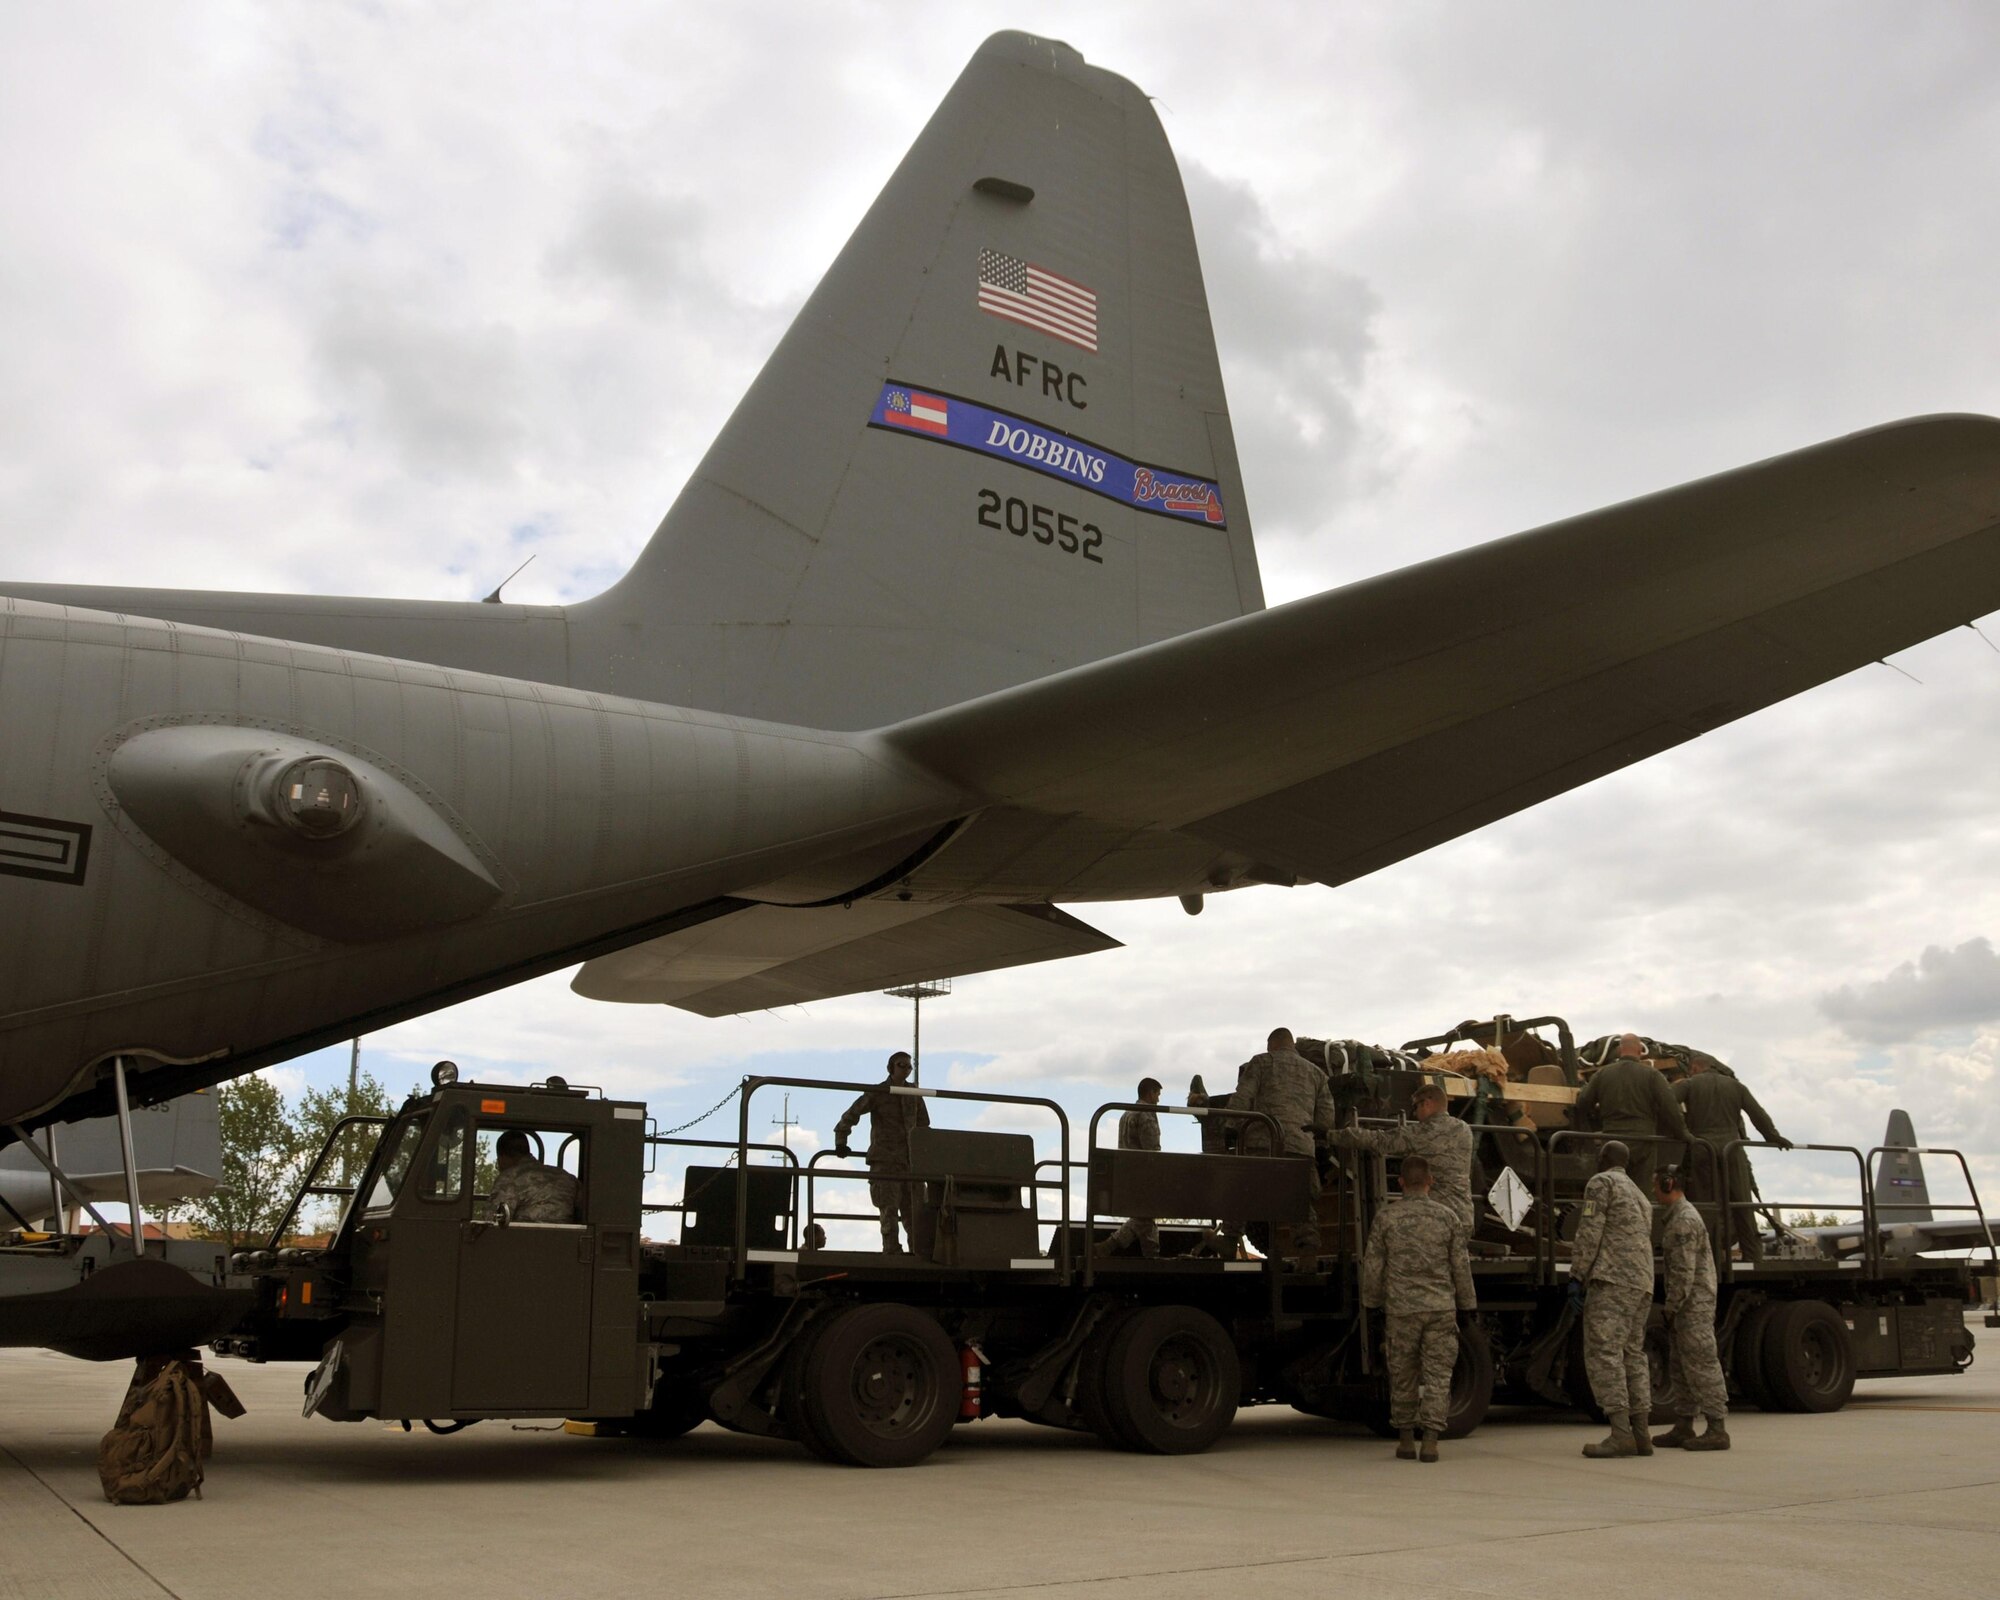 A load team uses a K-Loader to load a Humvee into the cargo area of a C-130 Hercules at Aviano Air Base, Italy on April 10, 2016. The Humvee was then air dropped over Hohenfels Training Area, Germany in support of Exercise Saber Junction 16. (U.S. Air Force photo/ Senior Airman Andrew J. Park)
